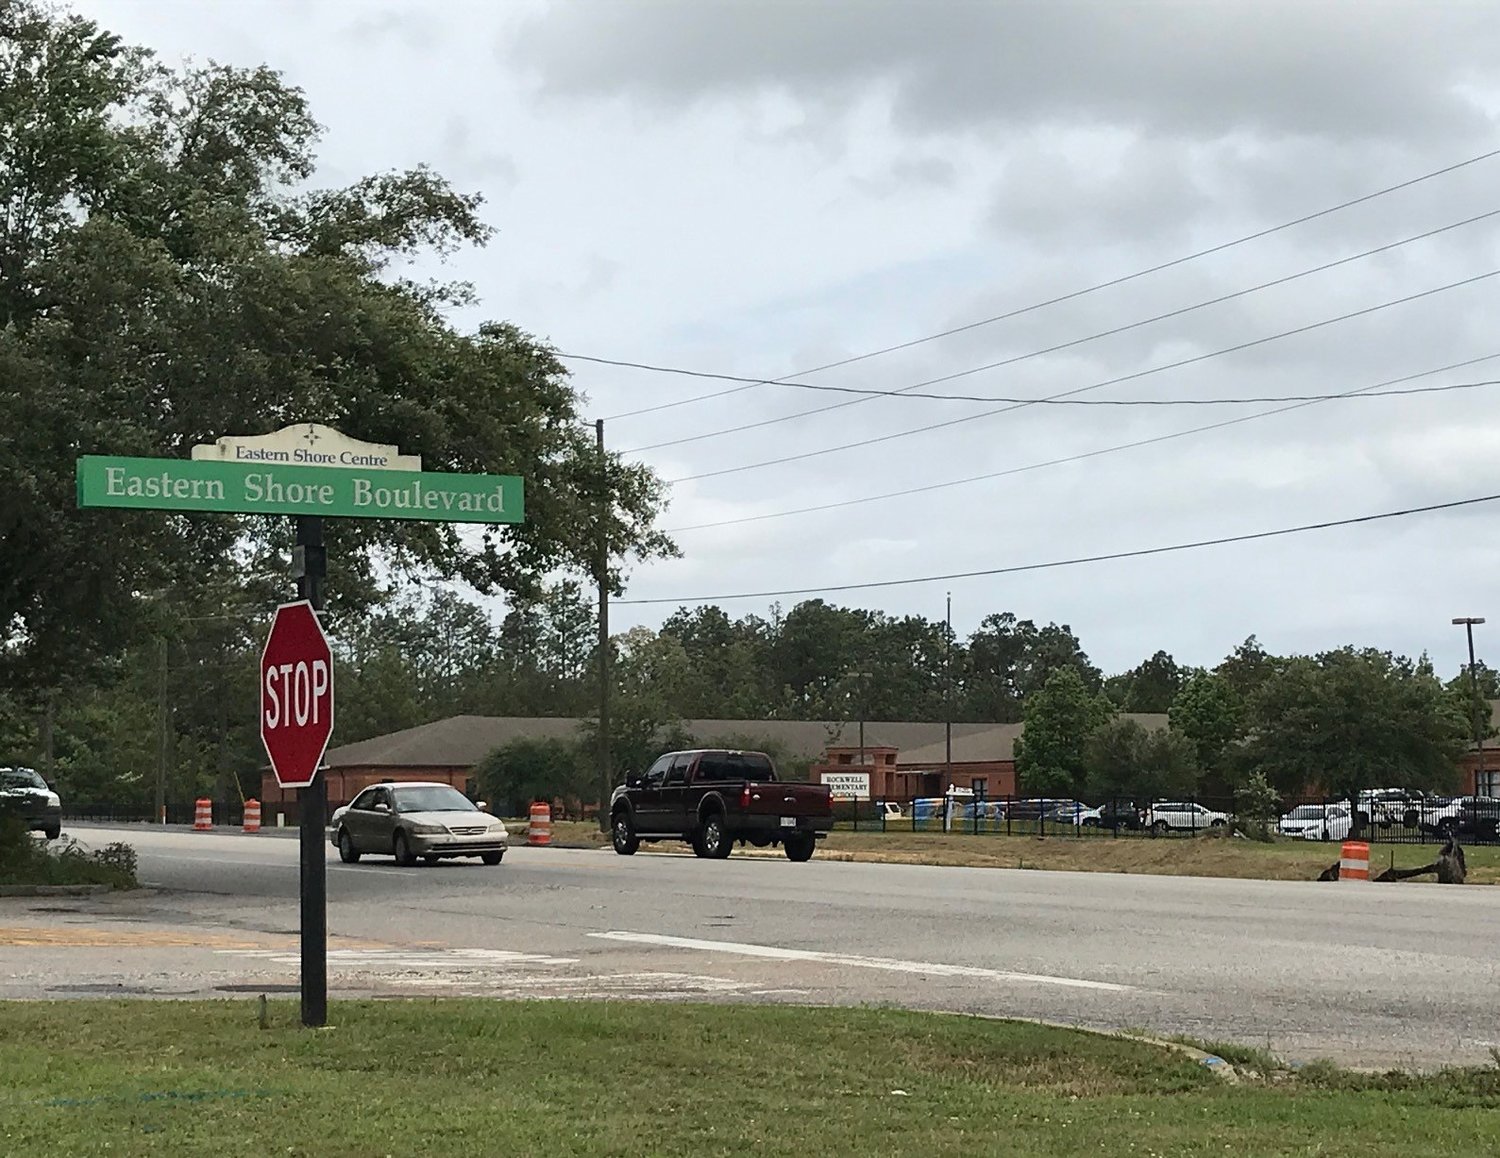 Spanish Fort plans to install a new traffic light at the intersection of US 31 and Eastern Shore Boulevard.